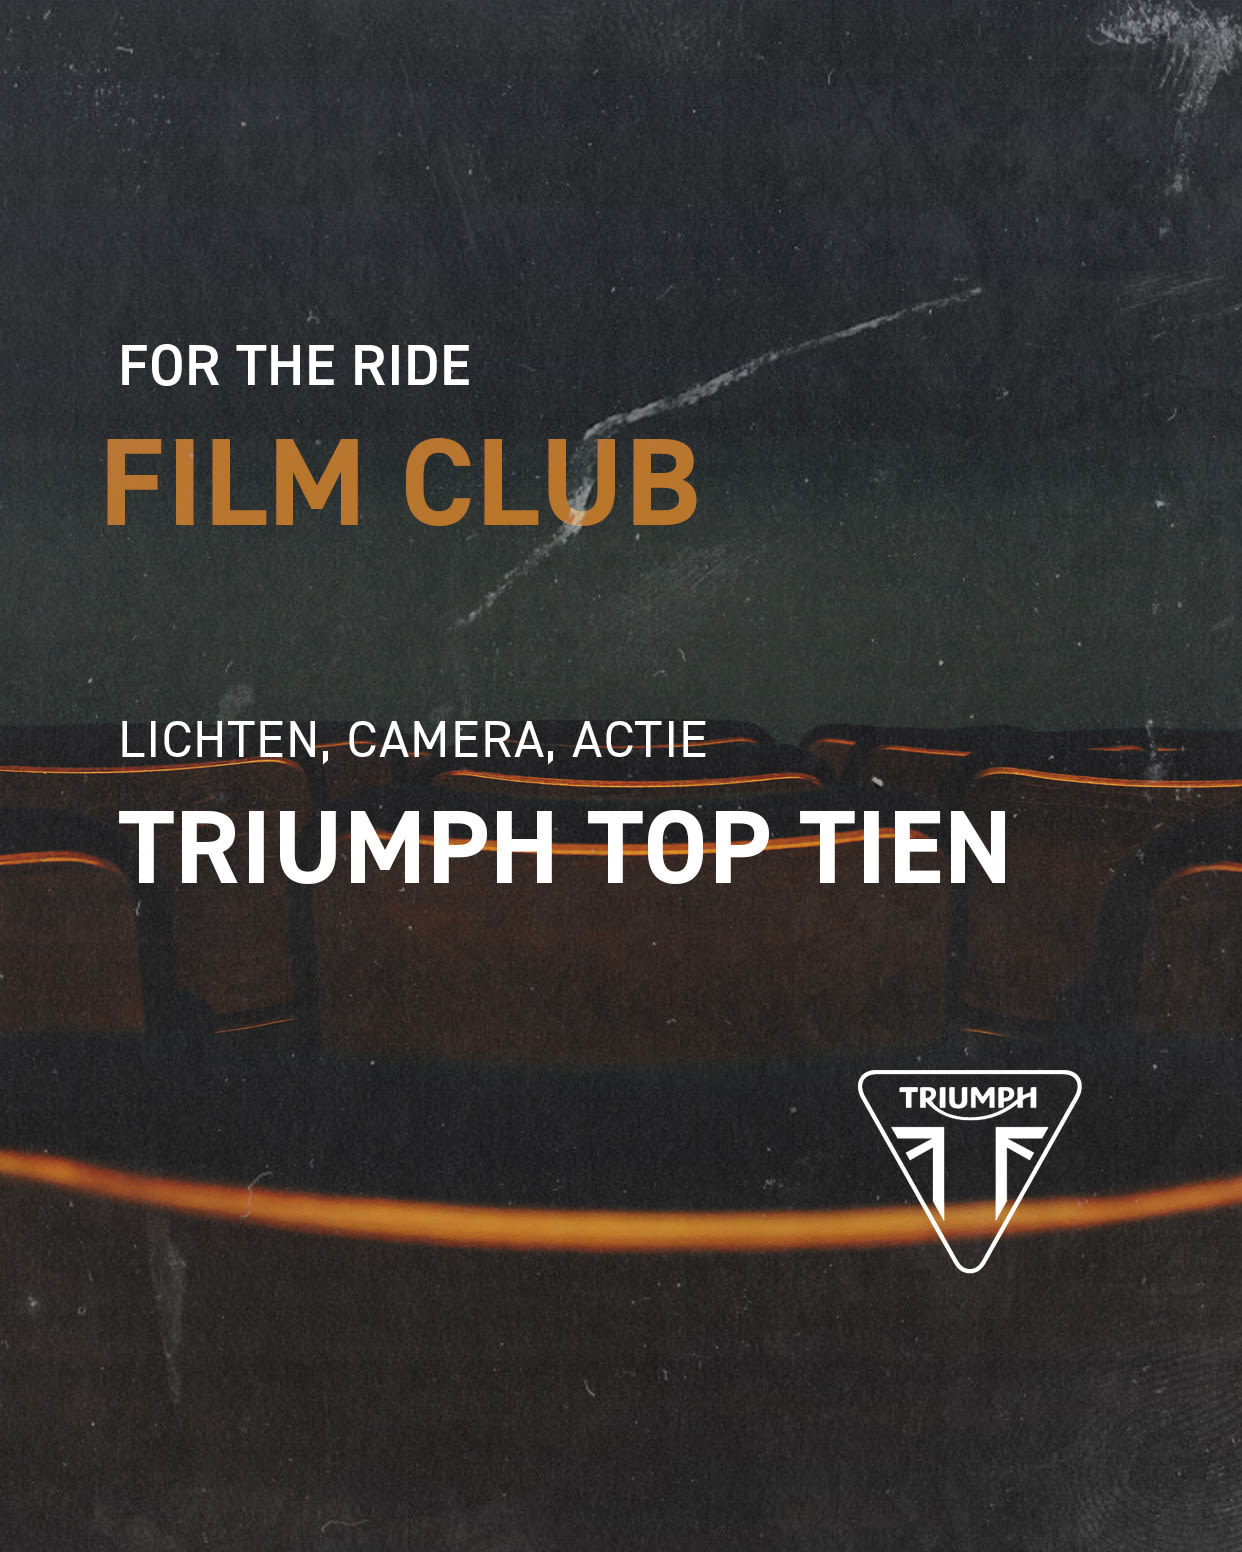 For the ride Triumph top 10 films